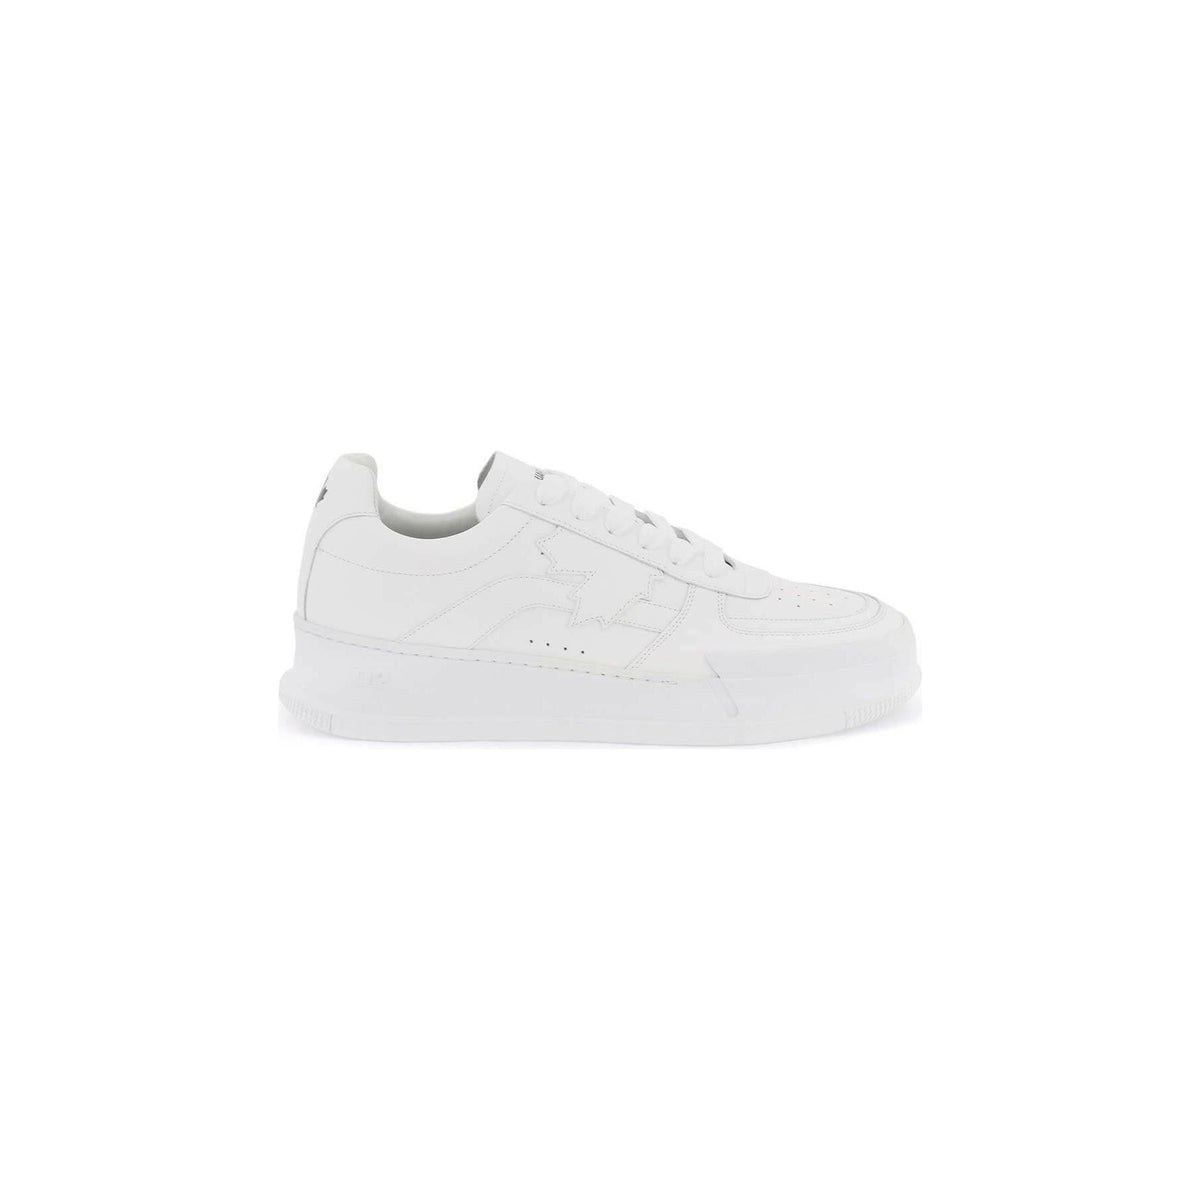 DSQUARED2 - White Leather Canadian Sneakers With Canadian Leaf Detail - JOHN JULIA